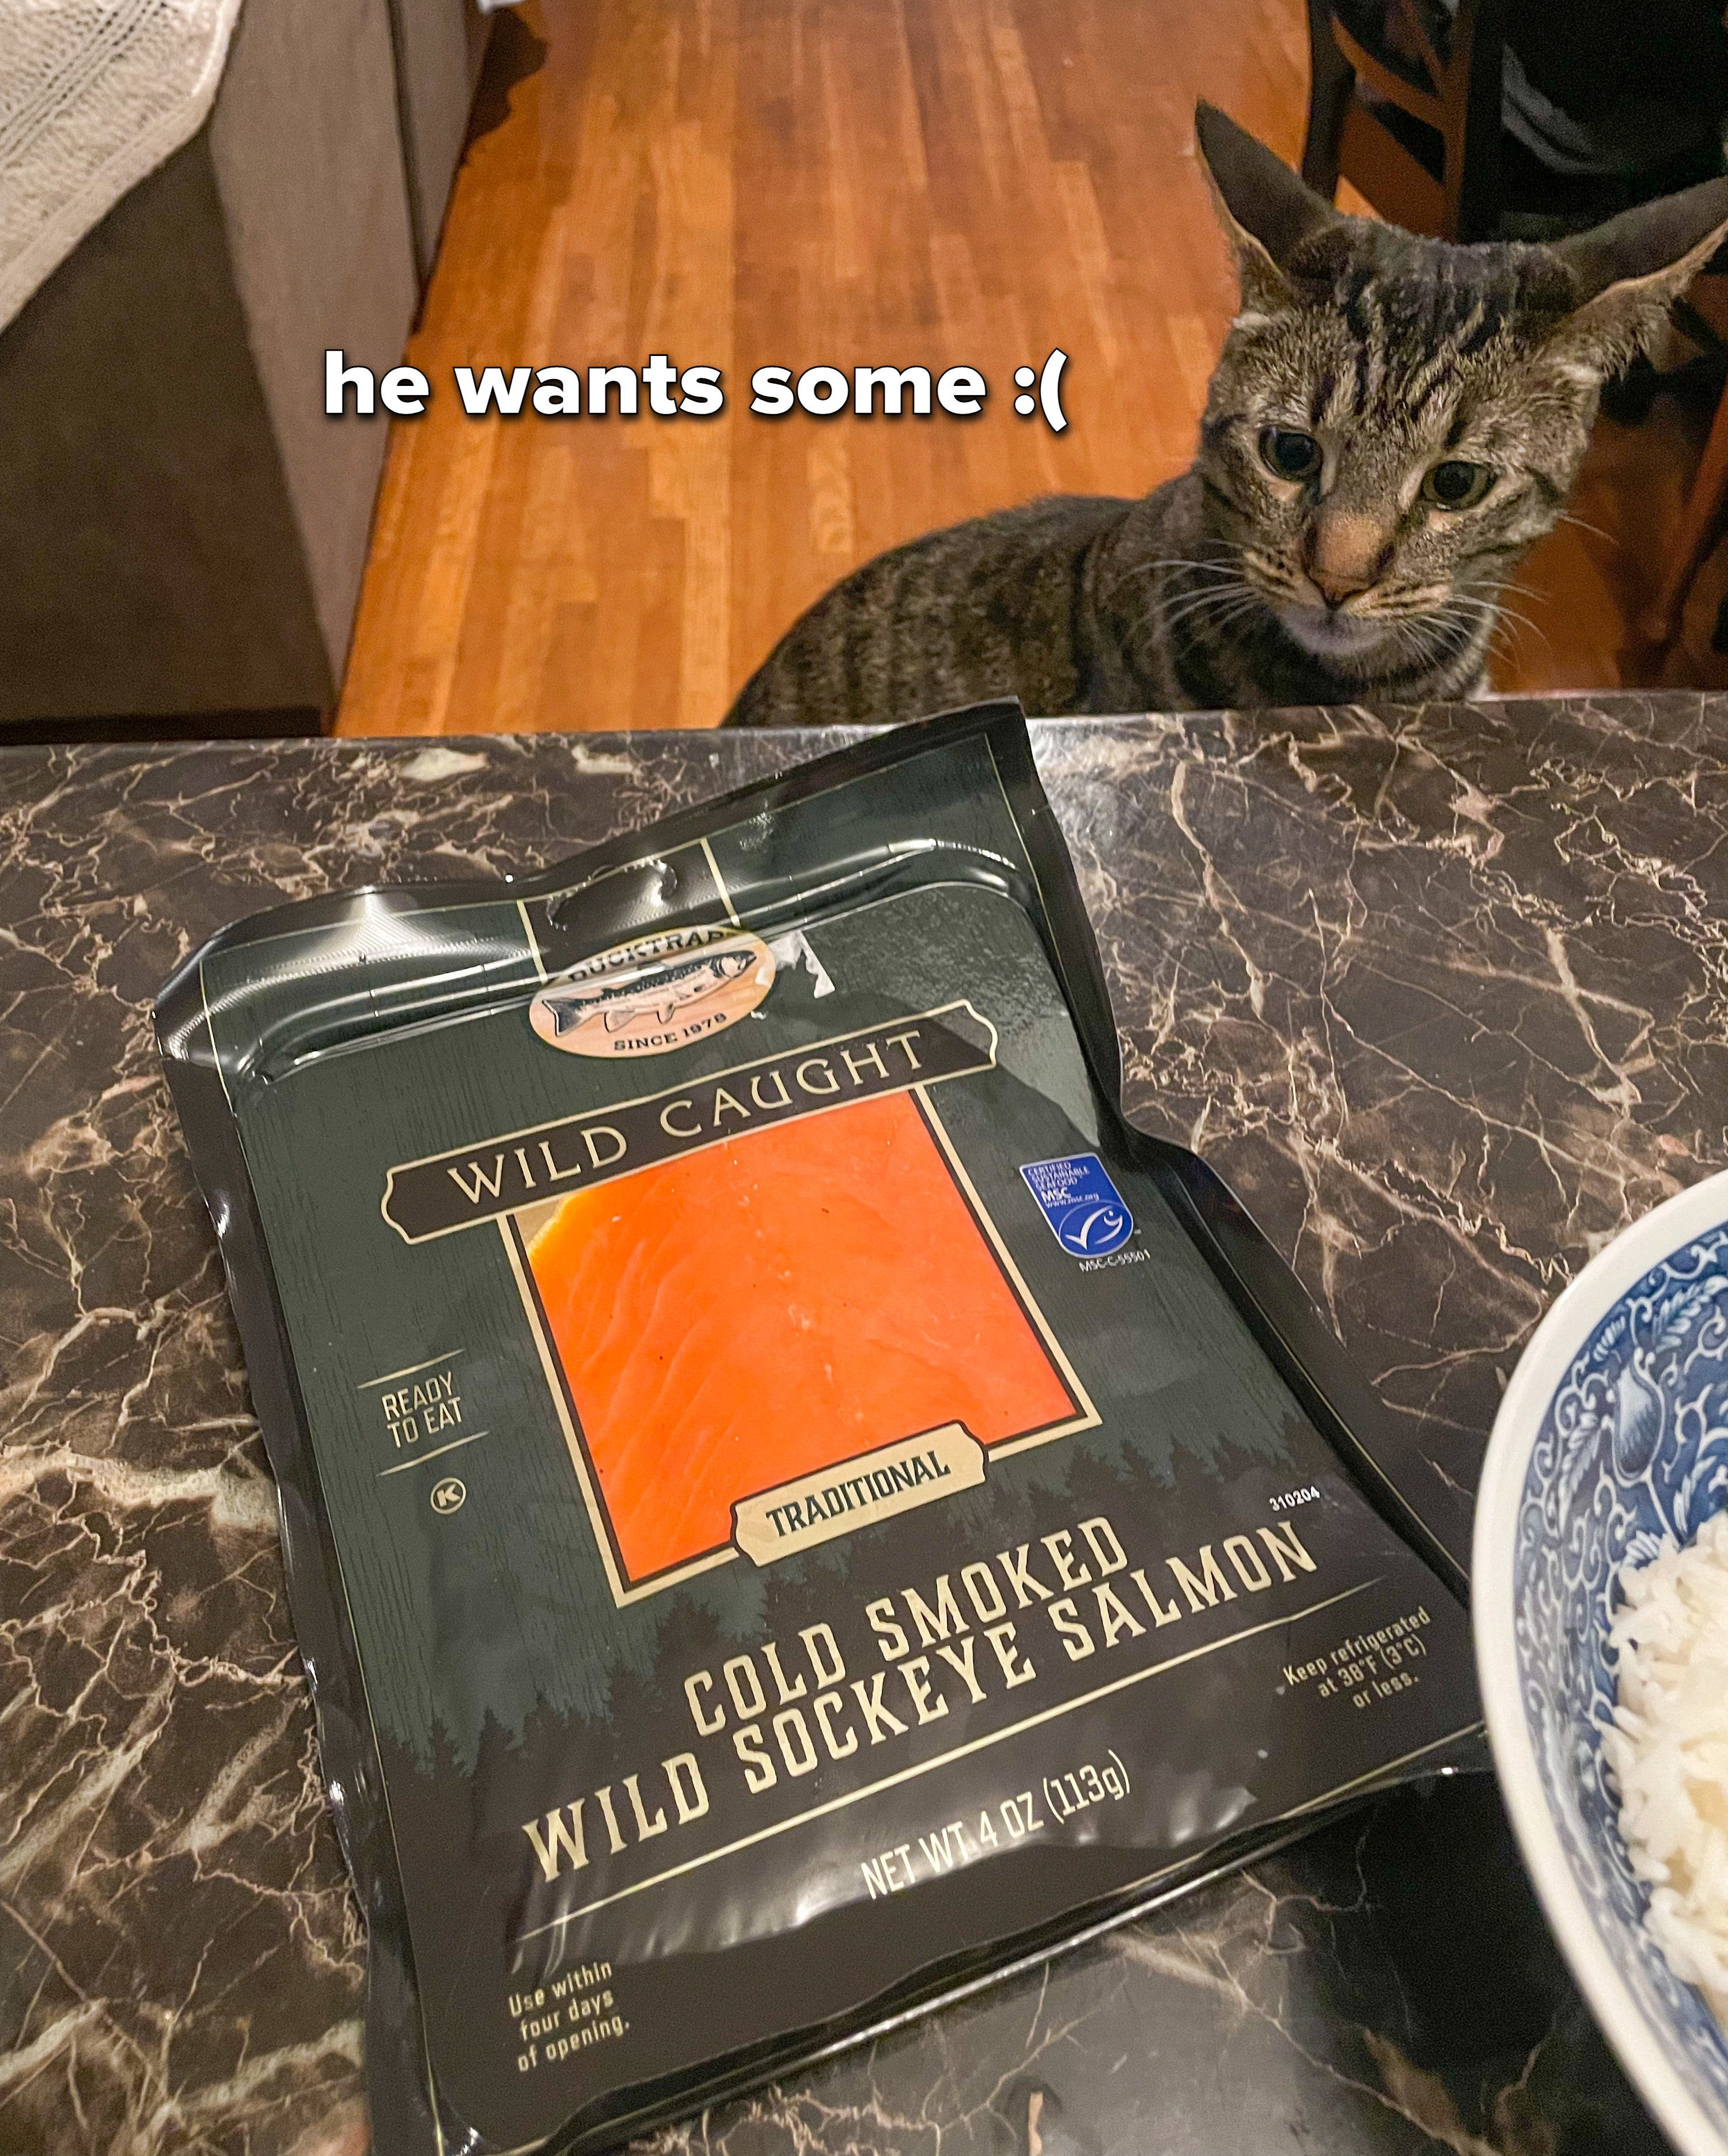 A package of smoked salmon on a countertop. A very cute cat on a stool is eyeing the package sneakily